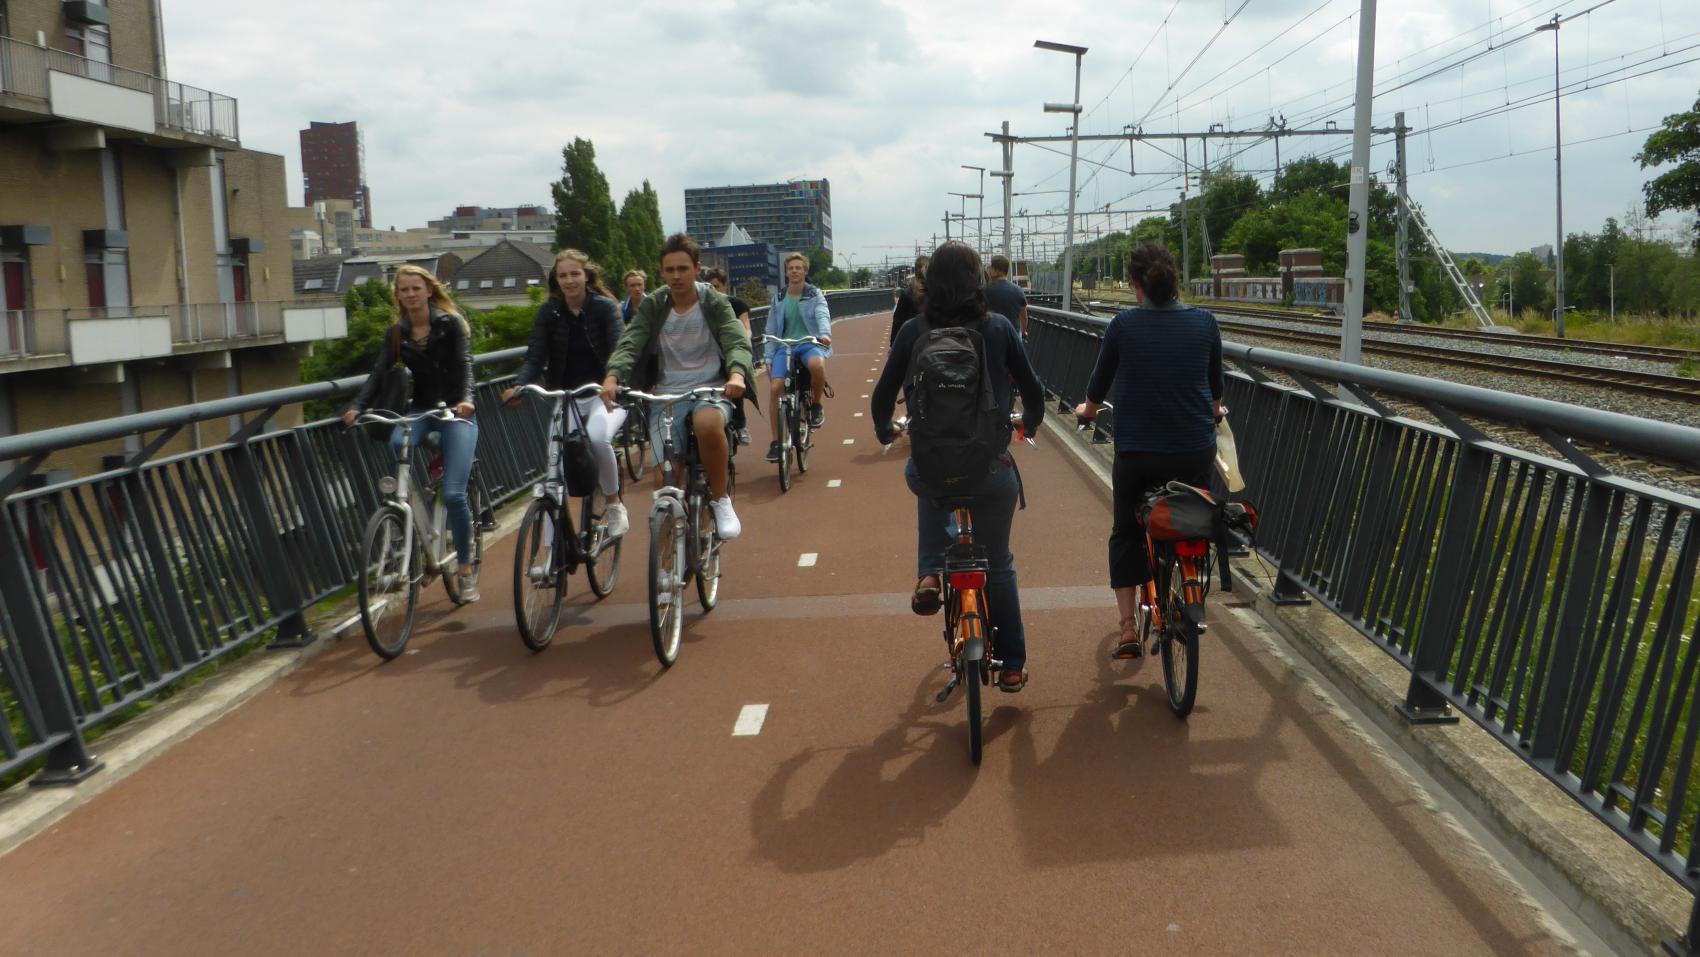 The railings bend outwards and have widest clearance at the level of typical bicycle handlebar, reducing the risk of collision and providing more space without increasing the width of the bridge itself.